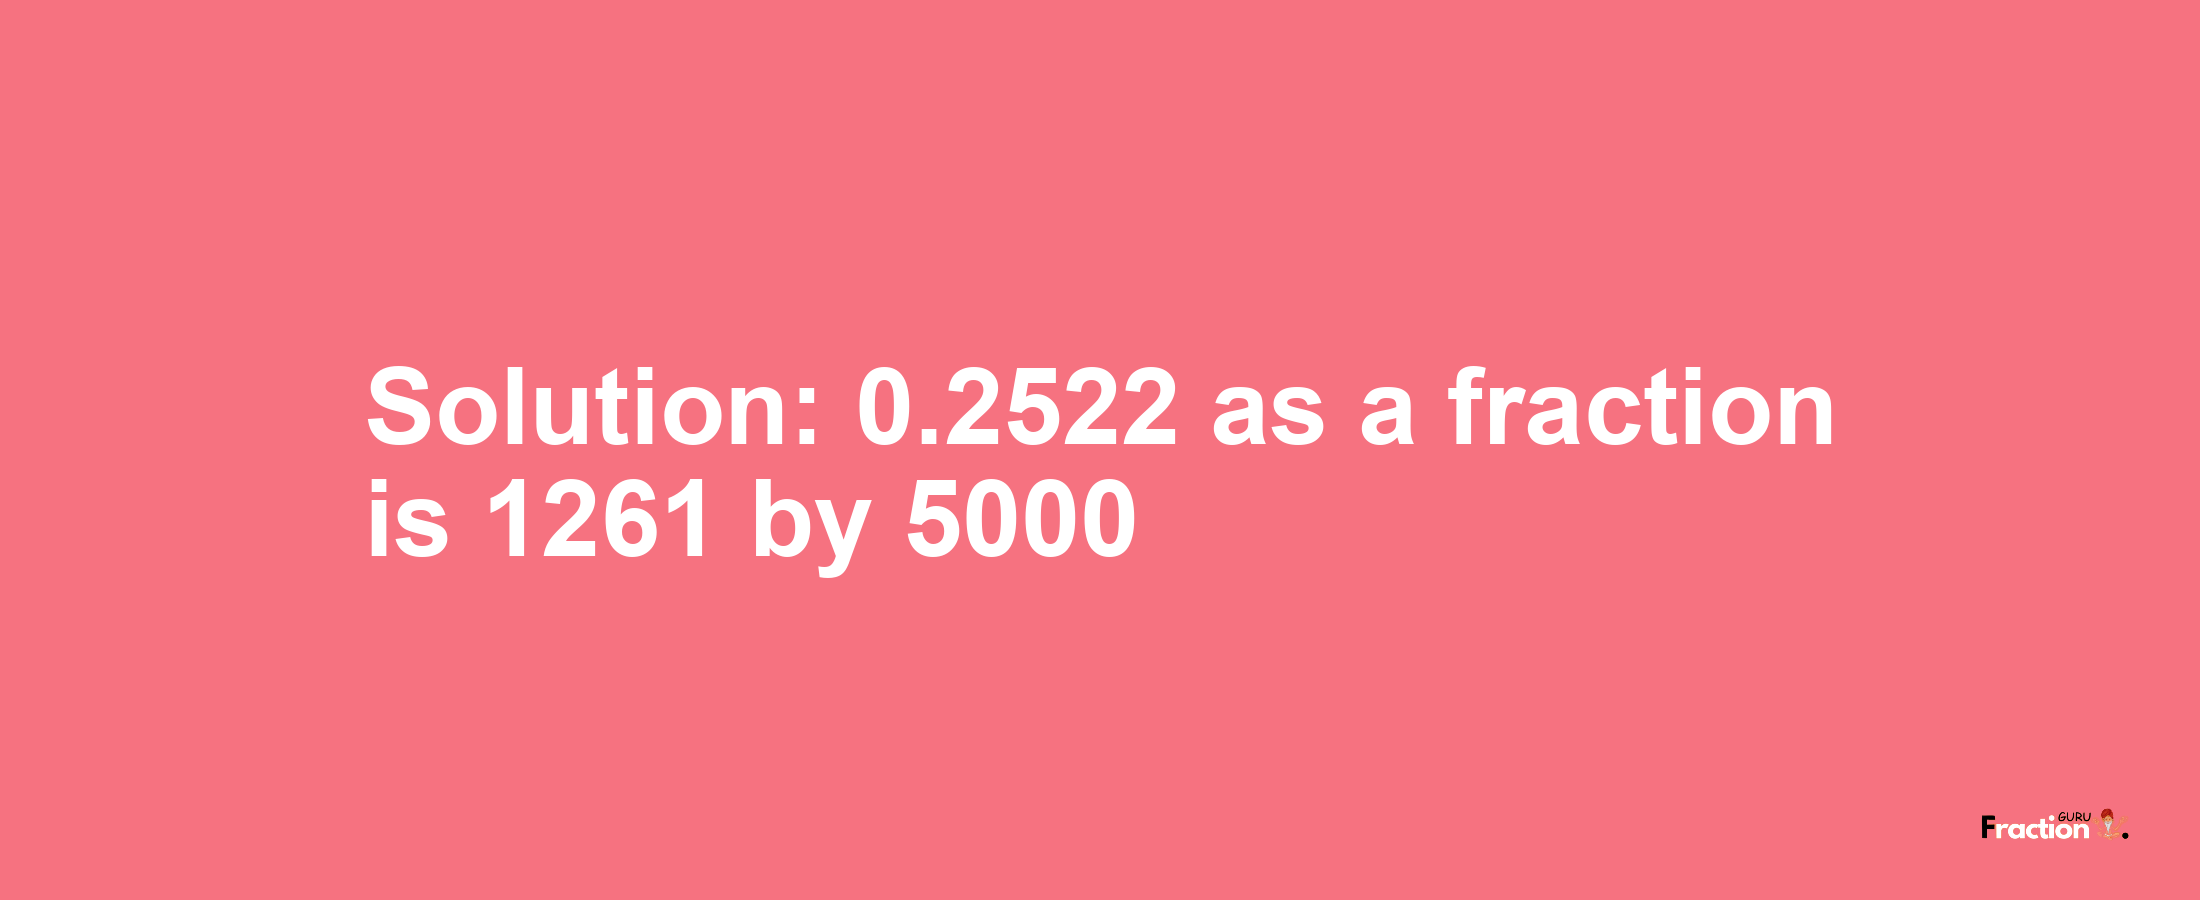 Solution:0.2522 as a fraction is 1261/5000